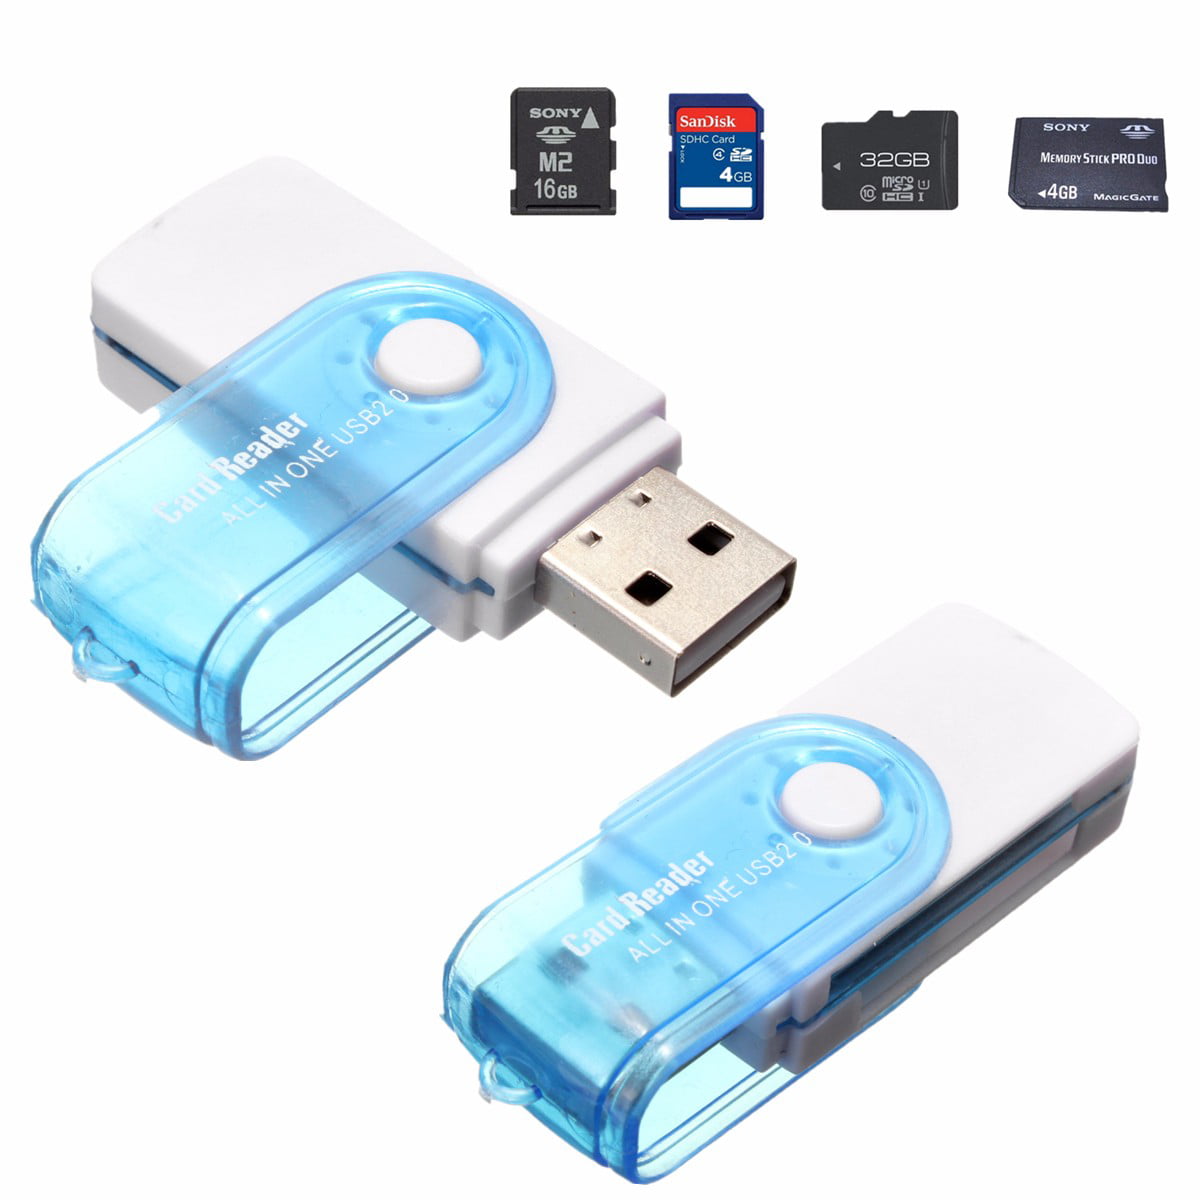 One USB 2.0 Memory Card Reader Writer Adapter for SD MMC SDHC TF Card UP To 64GB